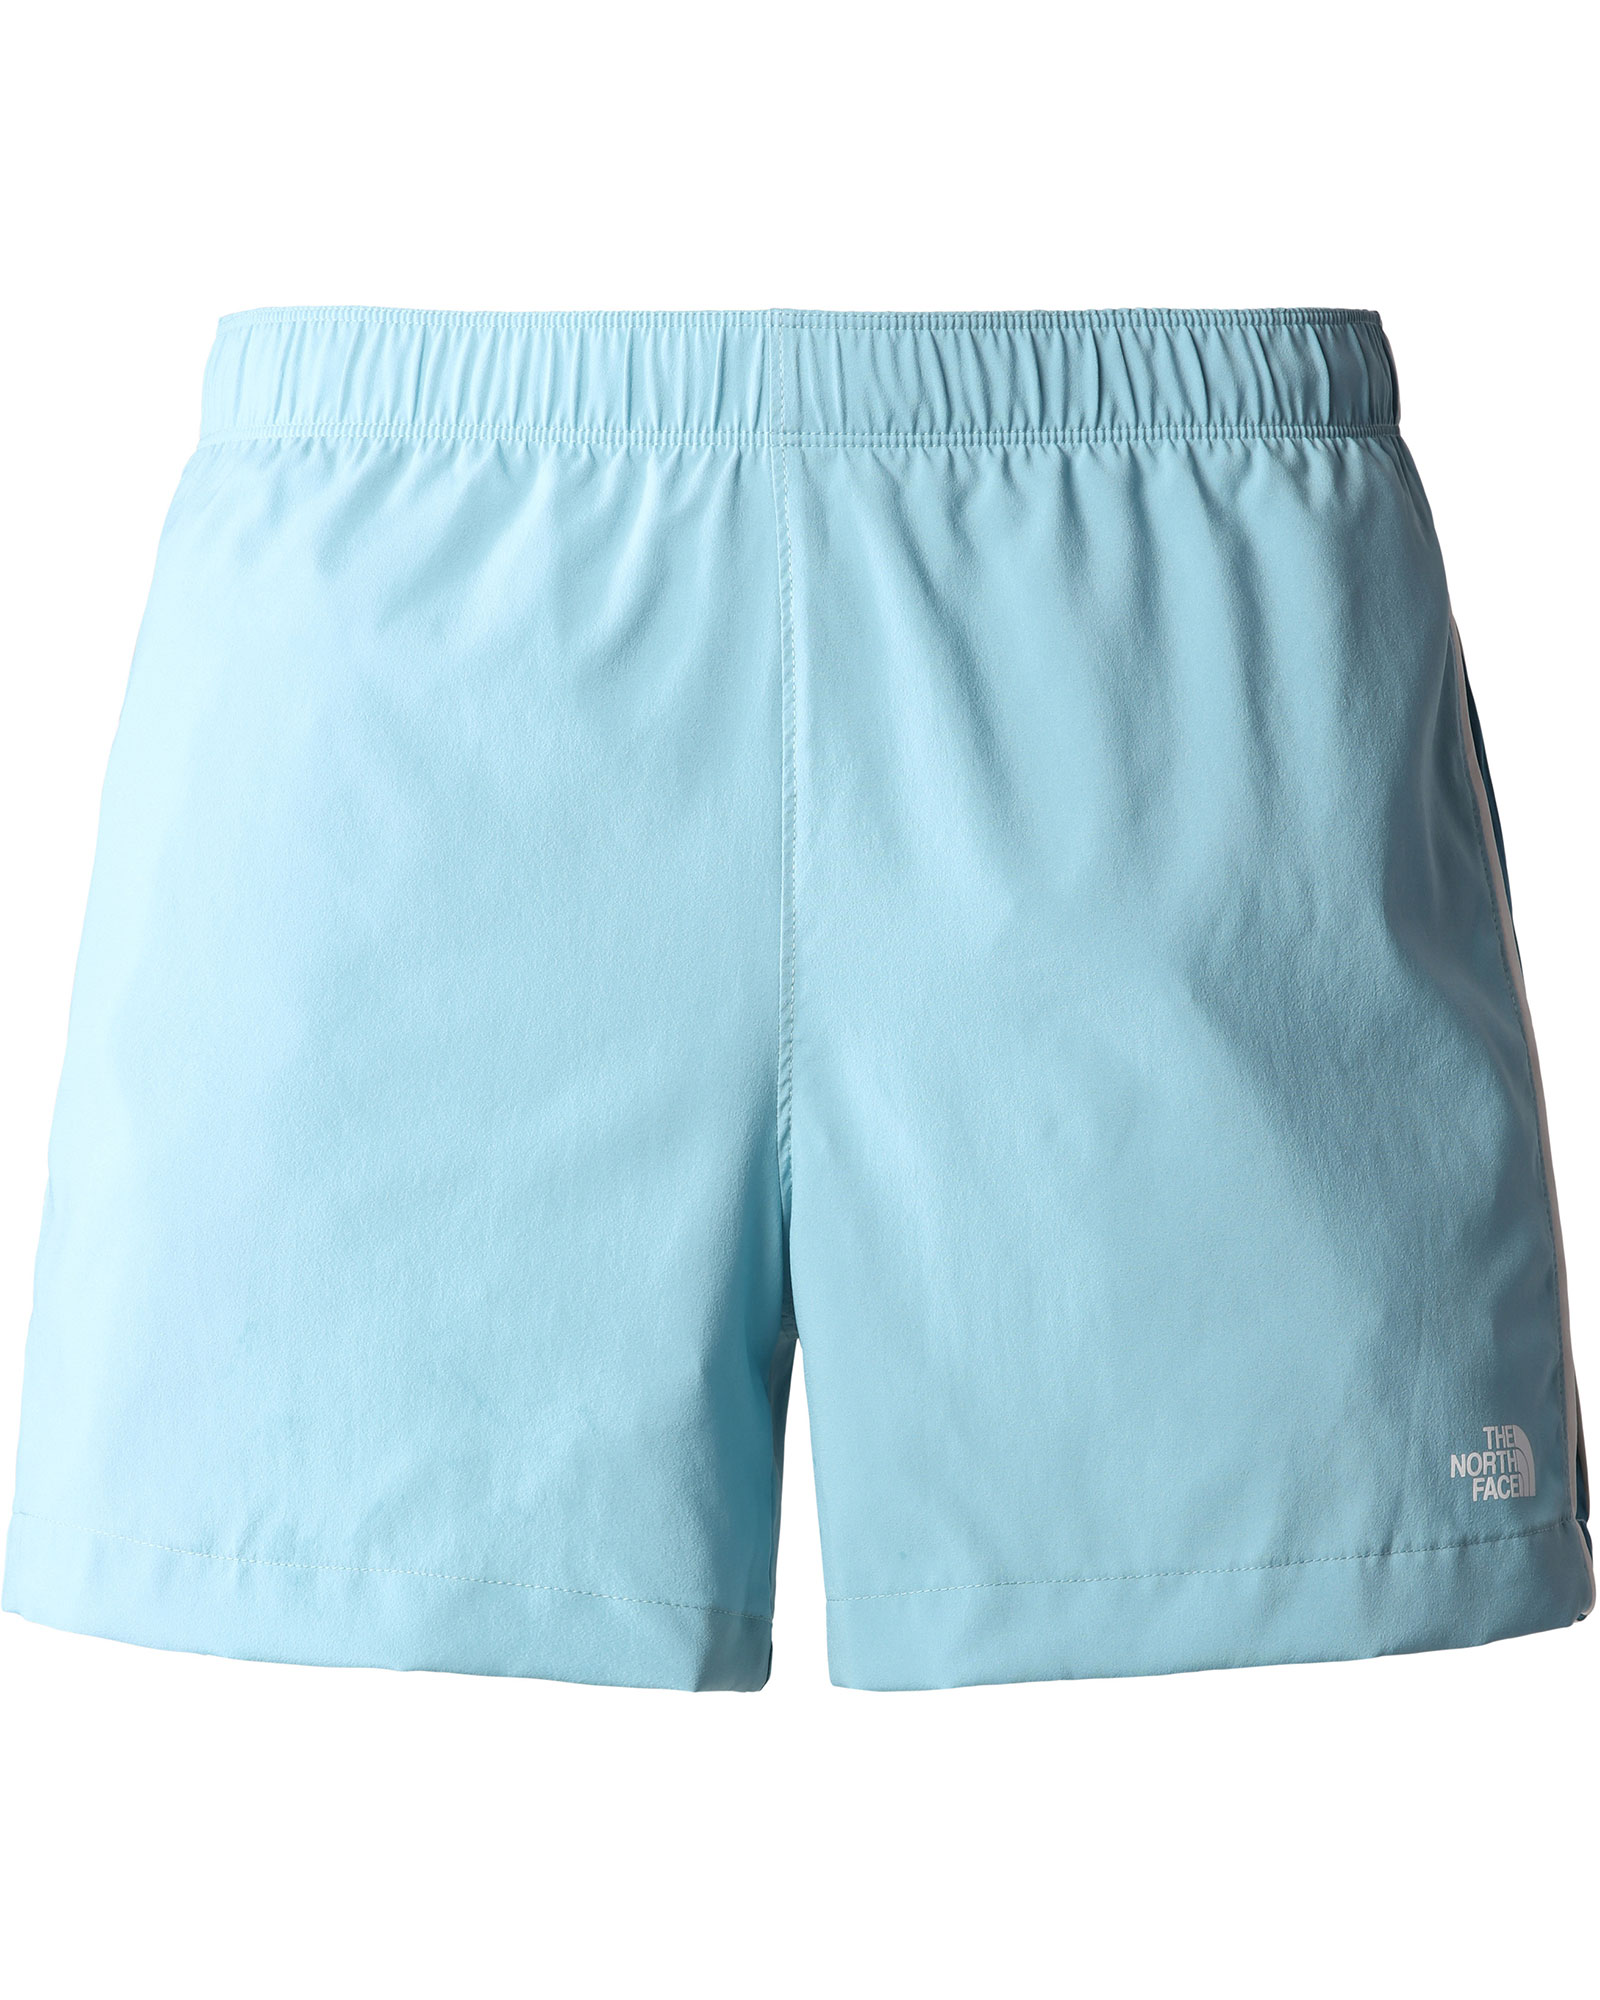 The North Face Men’s Elevation Shorts - Reef Waters XXL